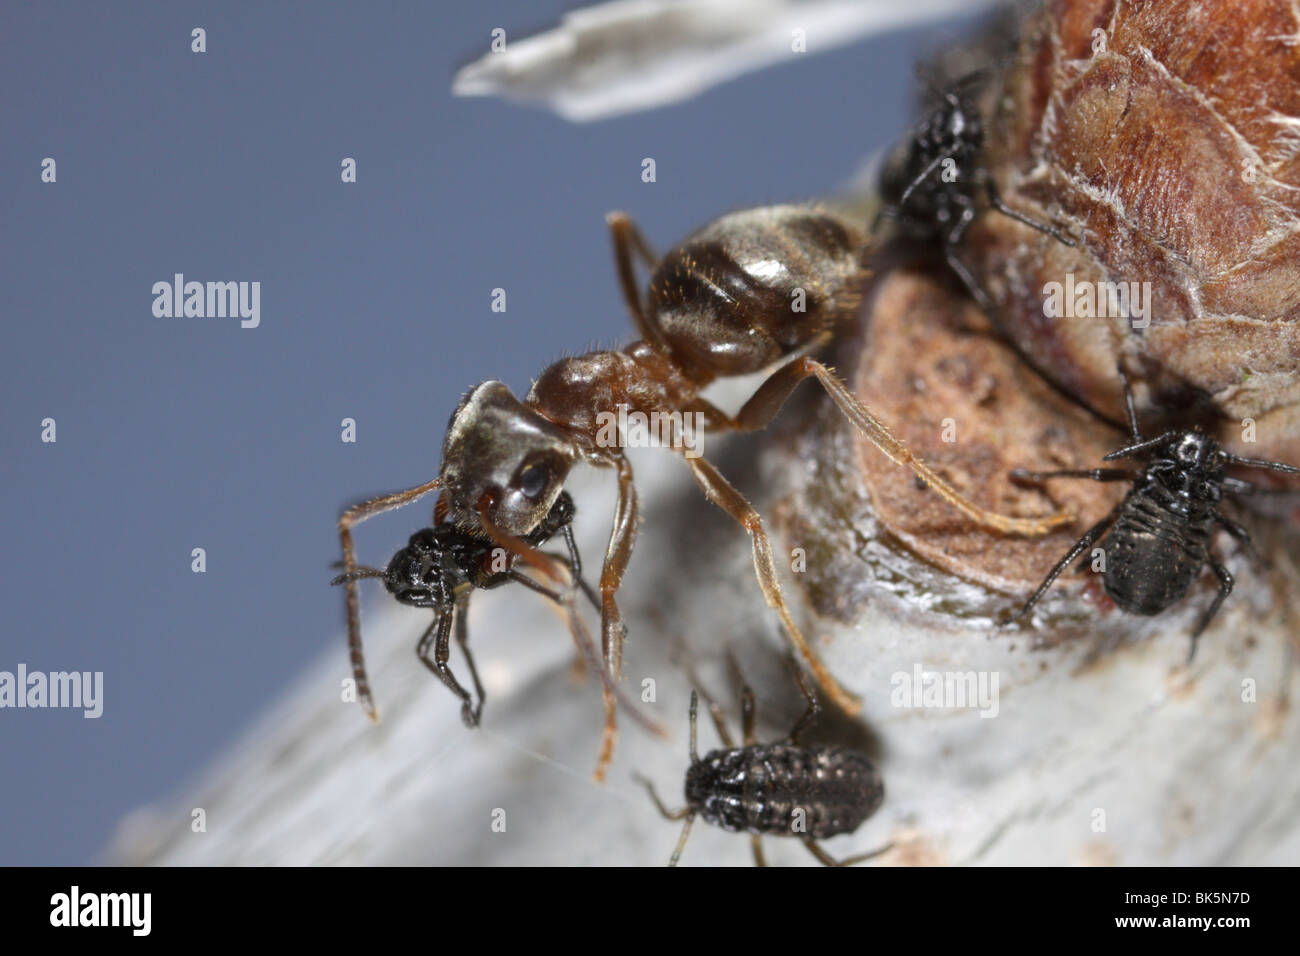 Ants (Lasius niger, Black Garden Ant) tending to aphids (Lachnus roboris) on an oak tree. The ant carries the aphid. Stock Photo